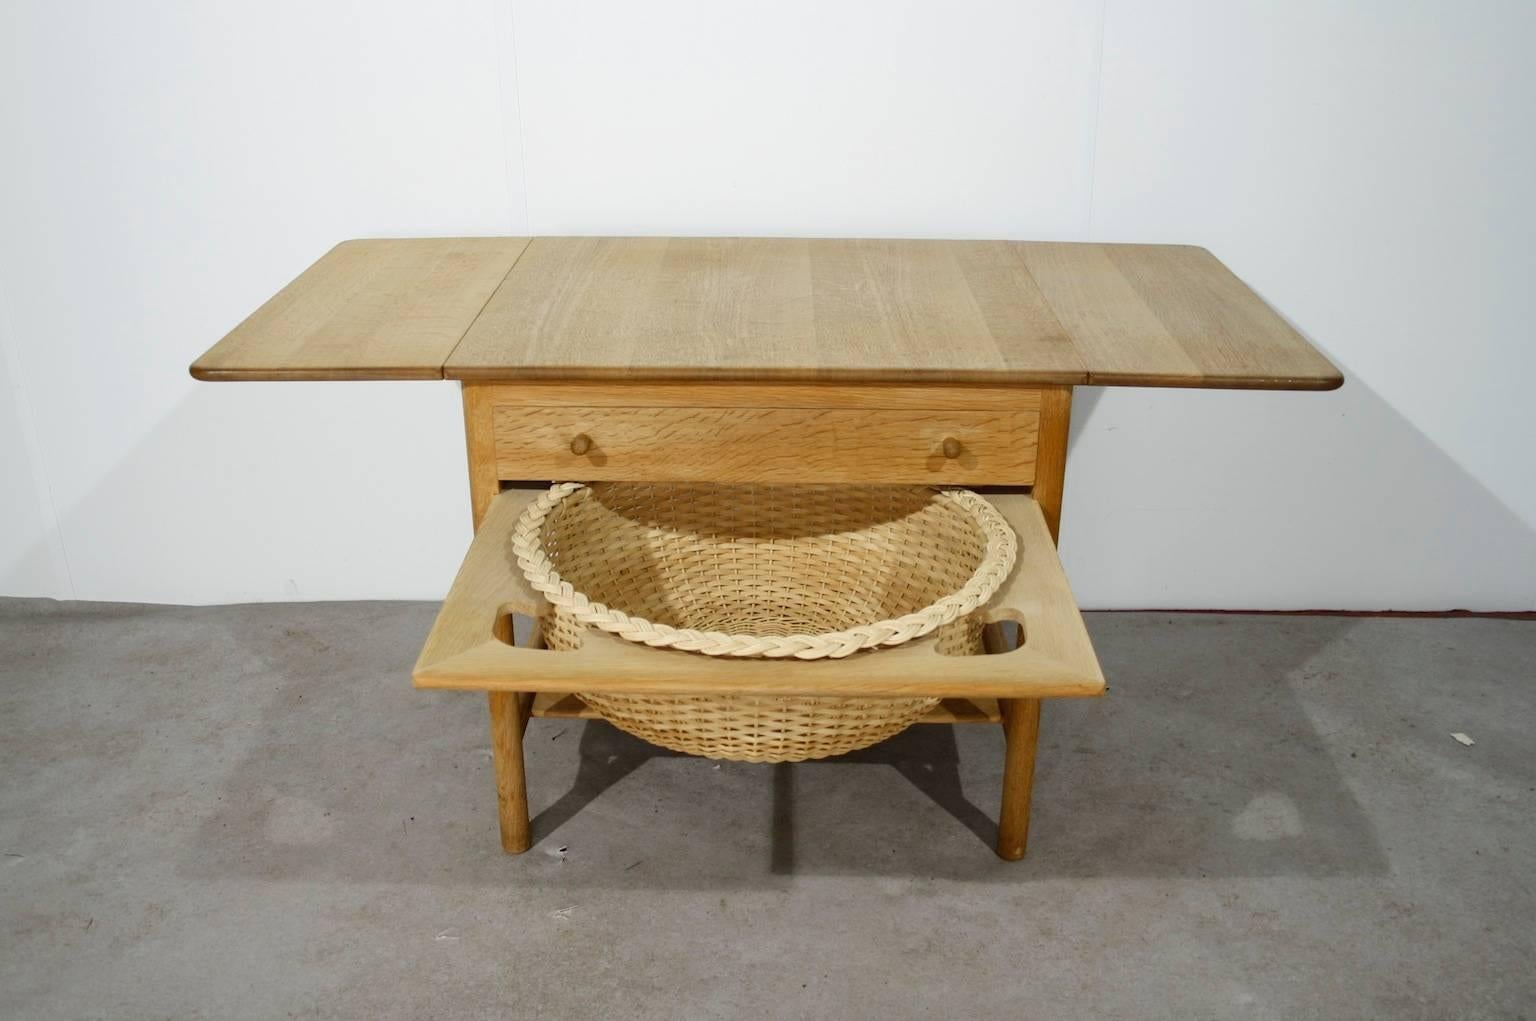 Oak sewing table with two drop leaves, a drawer and rattan basket.
In good condition.